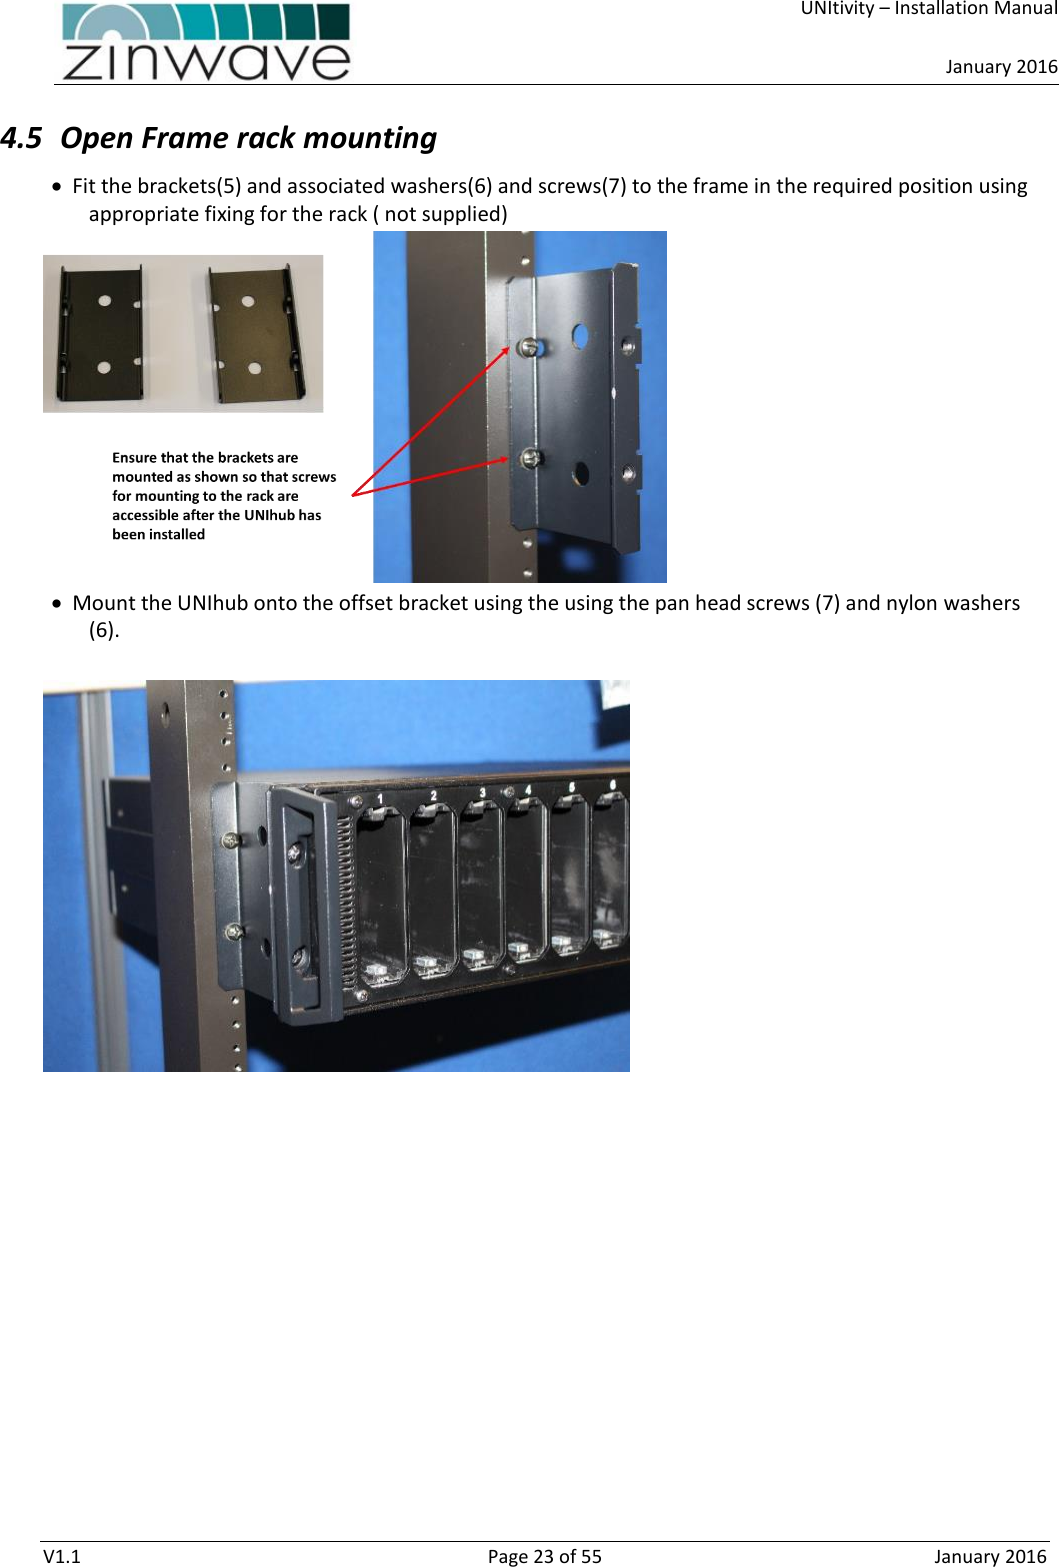     UNItivity – Installation Manual      January 2016  V1.1  Page 23 of 55  January 2016 4.5 Open Frame rack mounting  Fit the brackets(5) and associated washers(6) and screws(7) to the frame in the required position using appropriate fixing for the rack ( not supplied)   Mount the UNIhub onto the offset bracket using the using the pan head screws (7) and nylon washers (6).       